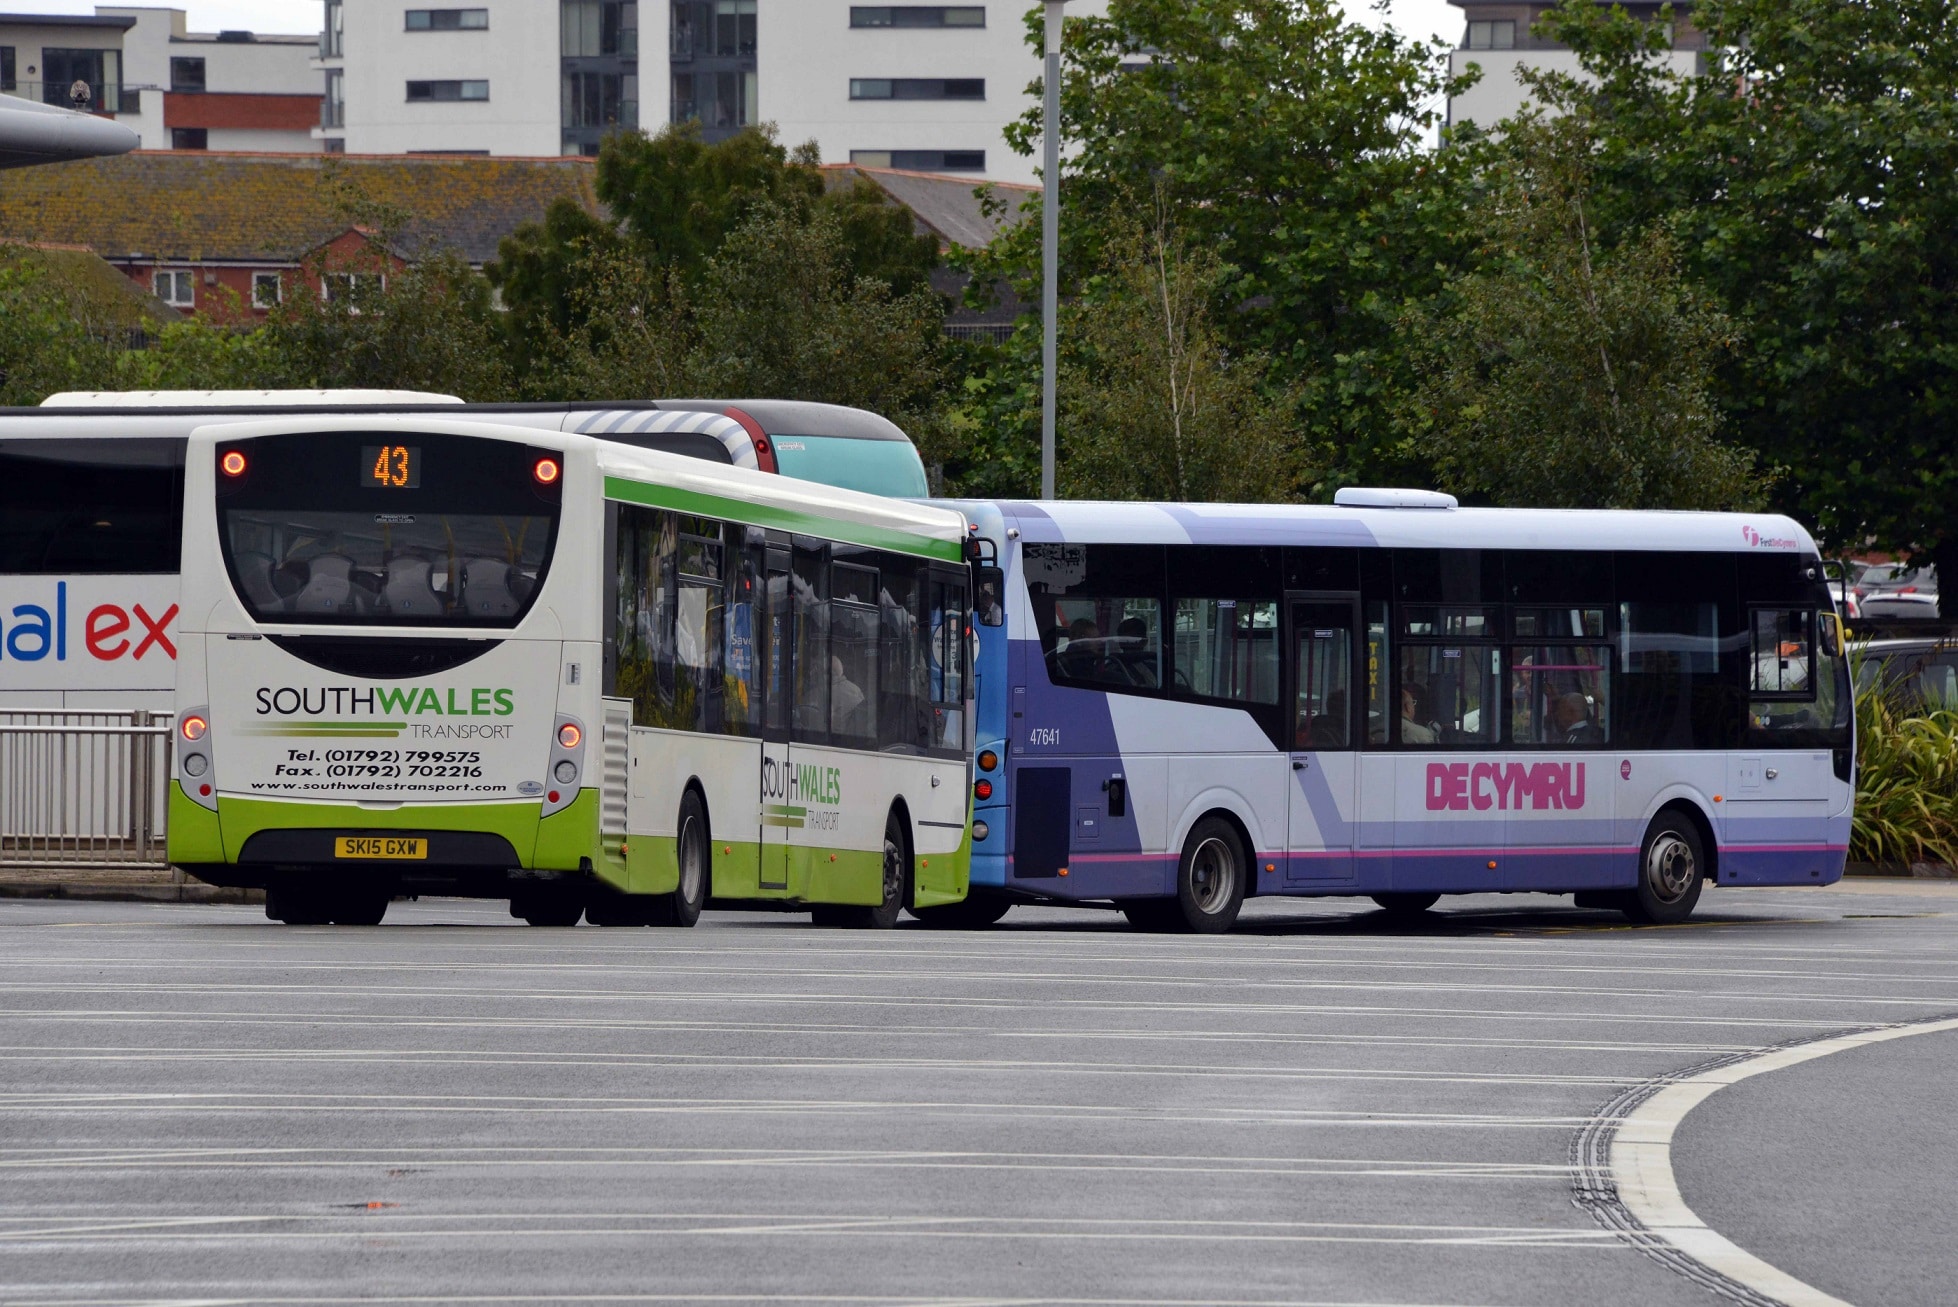 Welsh bus franchising plans are causing SMEs concern, Senedd committee told